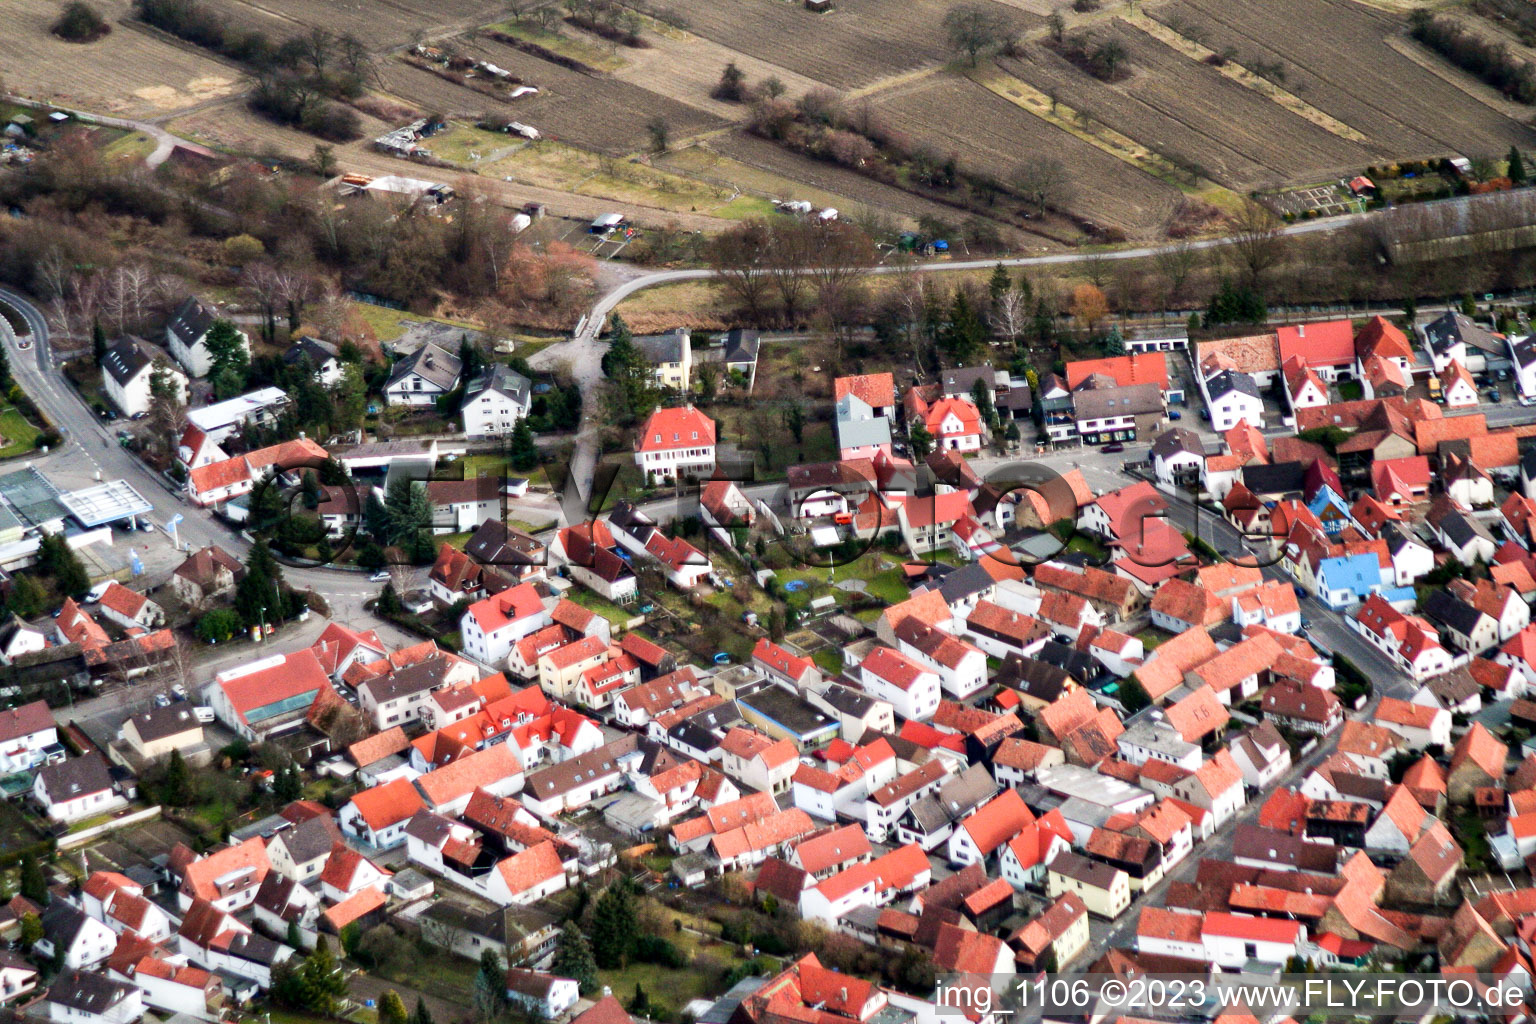 Drone recording of Hagenbach in the state Rhineland-Palatinate, Germany